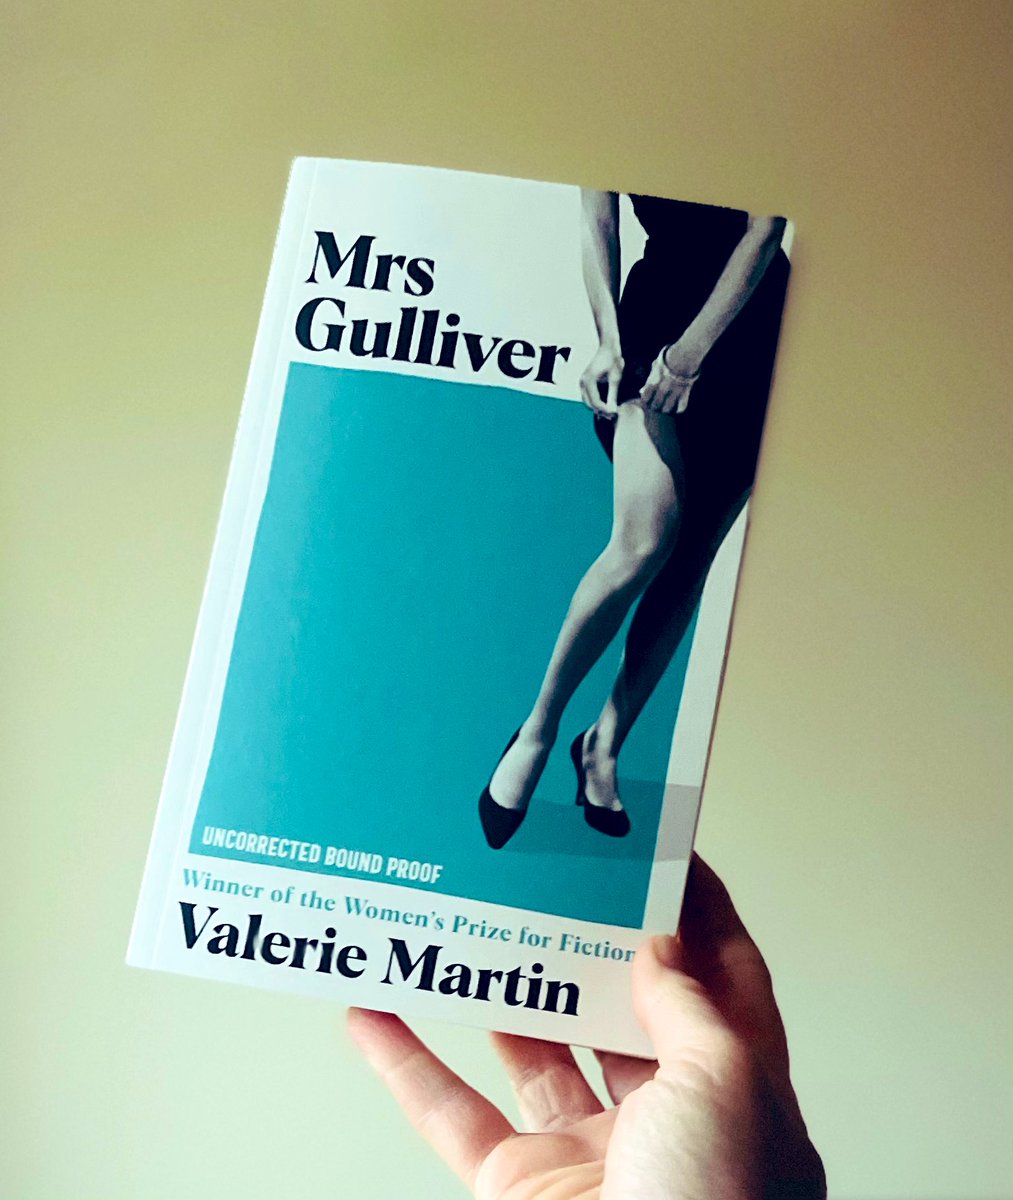 Thank you so much to Rosie and @serpentstail for my copy of #MrsGulliver by #ValerieMartin

It is out next March, and this story of two women and the unique world they inhabit sounds amazing!